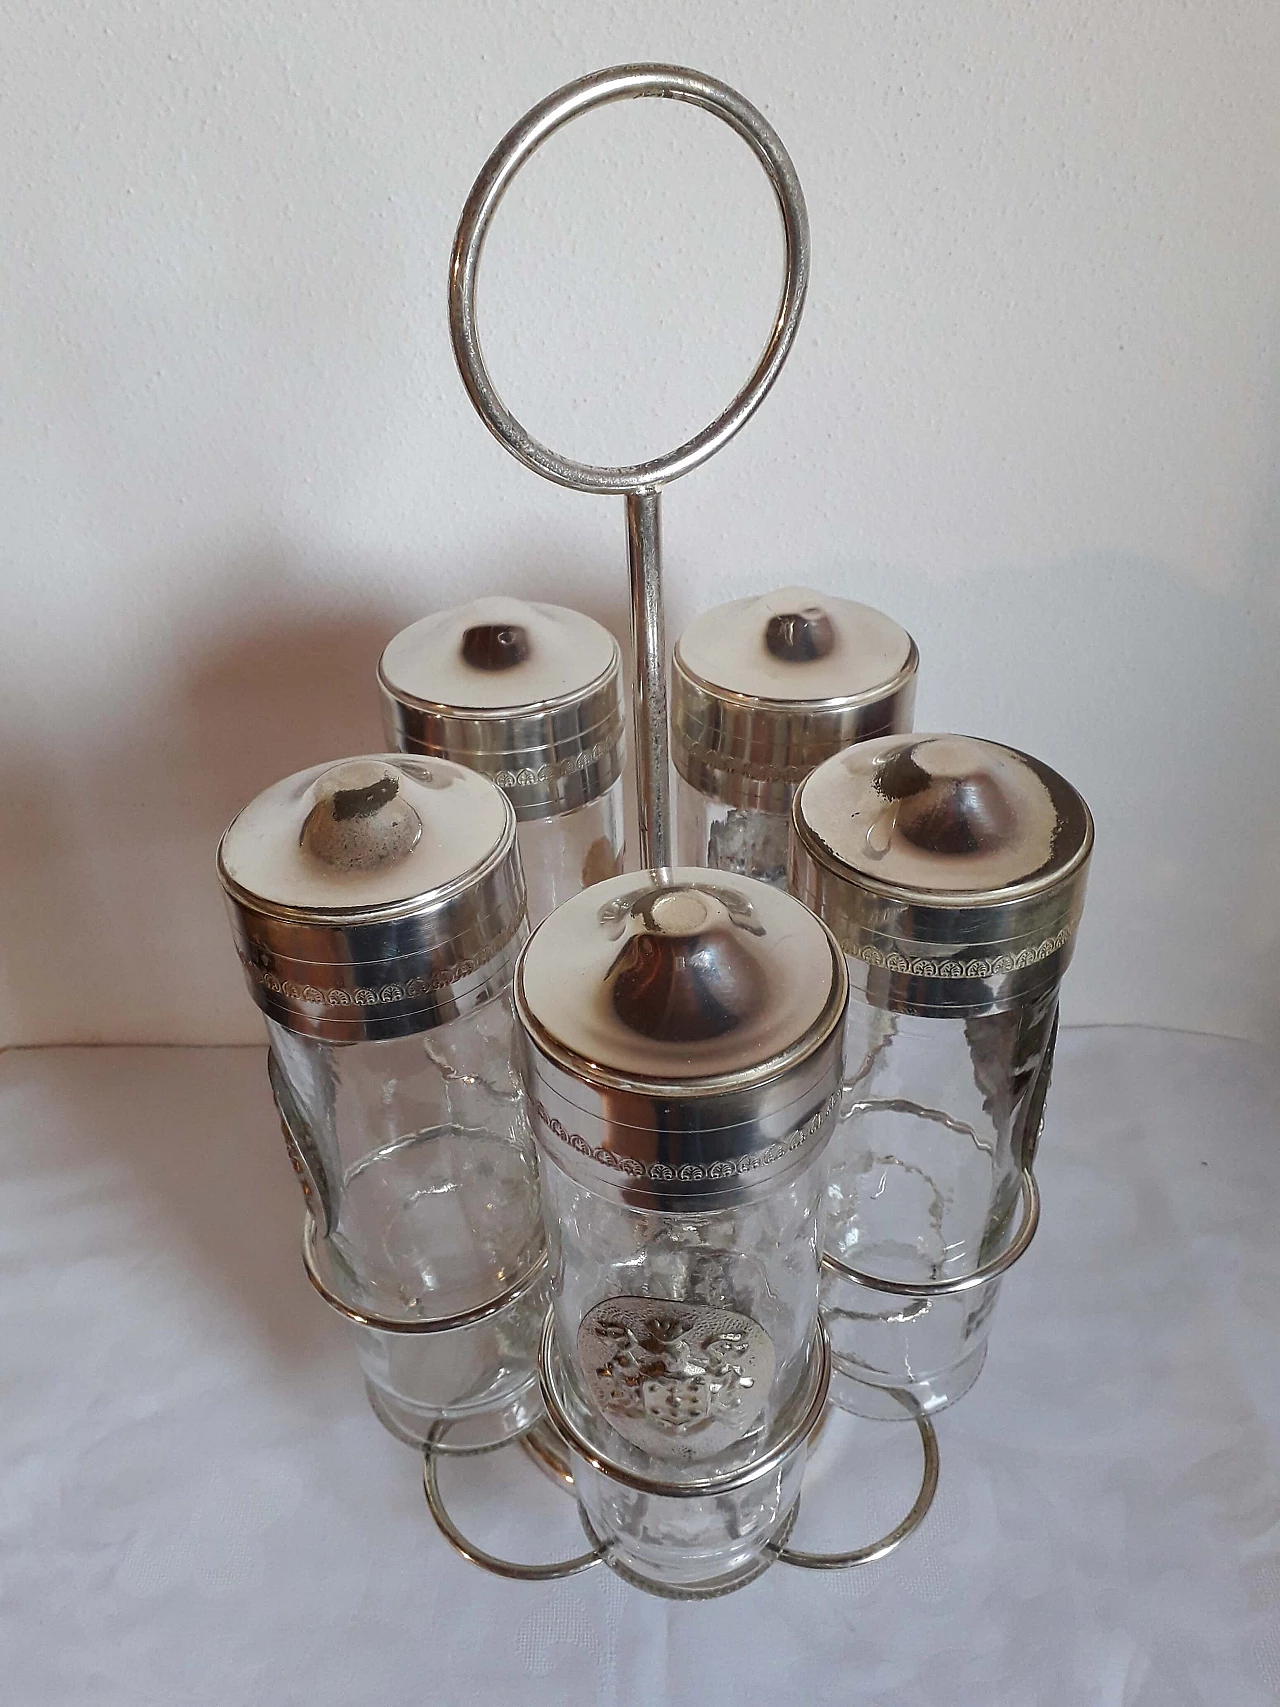 Toschi glass and silver containers for fruit in alcohol, 1960s 1470201